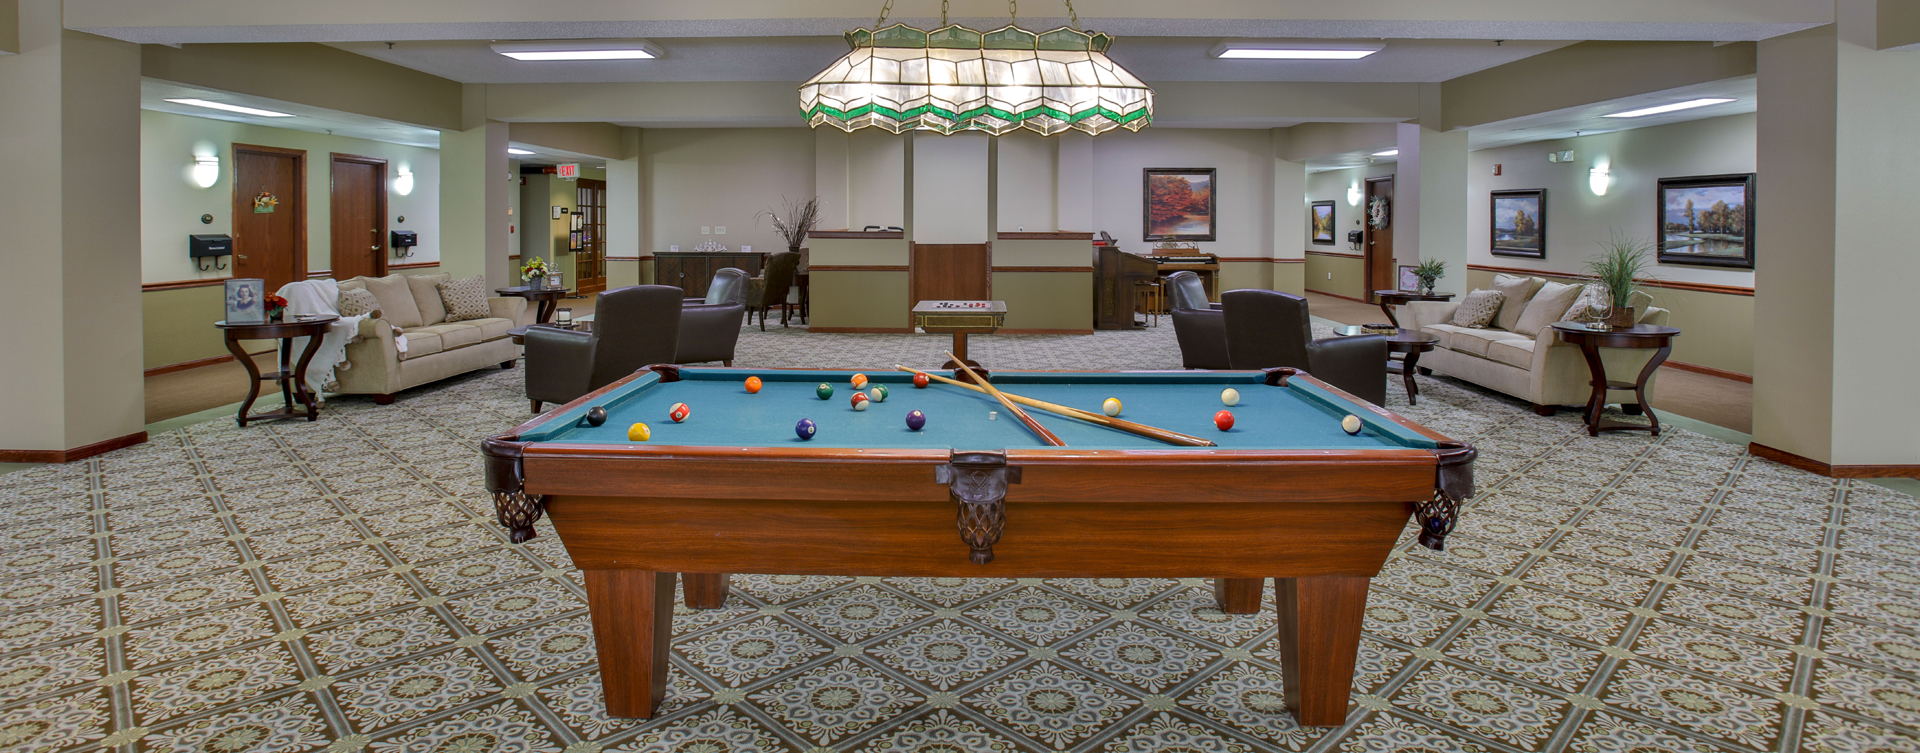 Enjoy a game of pool with friends at Bickford of Bloomington